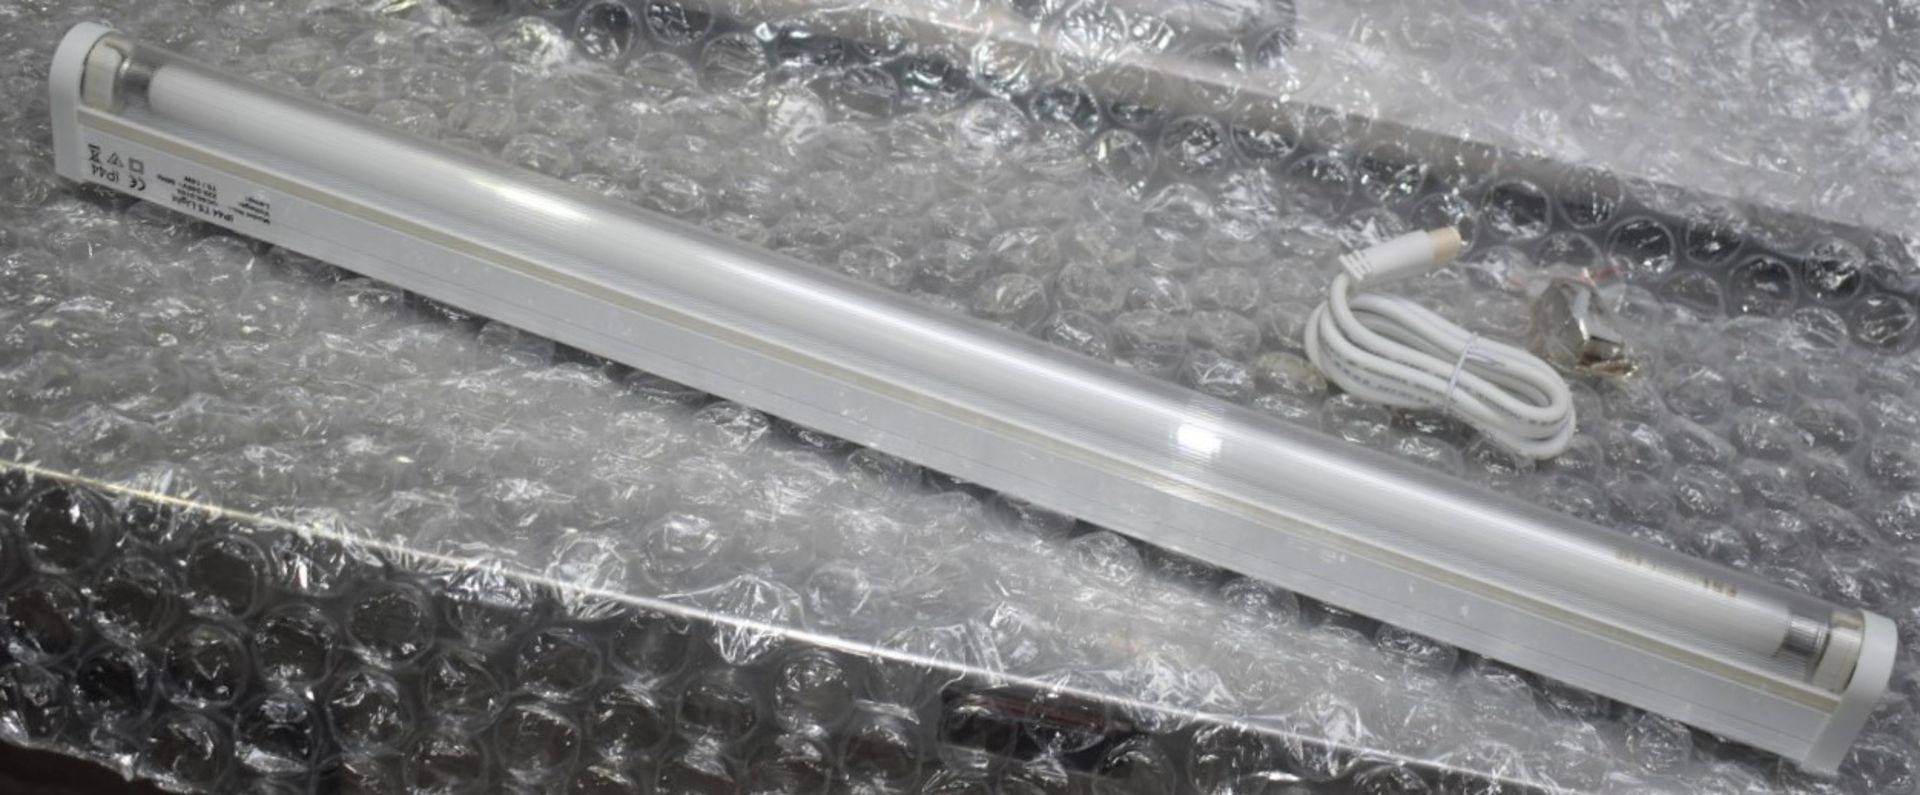 4 x Bathroom Light Fittings - IP44 Waterproof T5 14w Fluorescent Lights With Built-In Electronic - Image 4 of 11